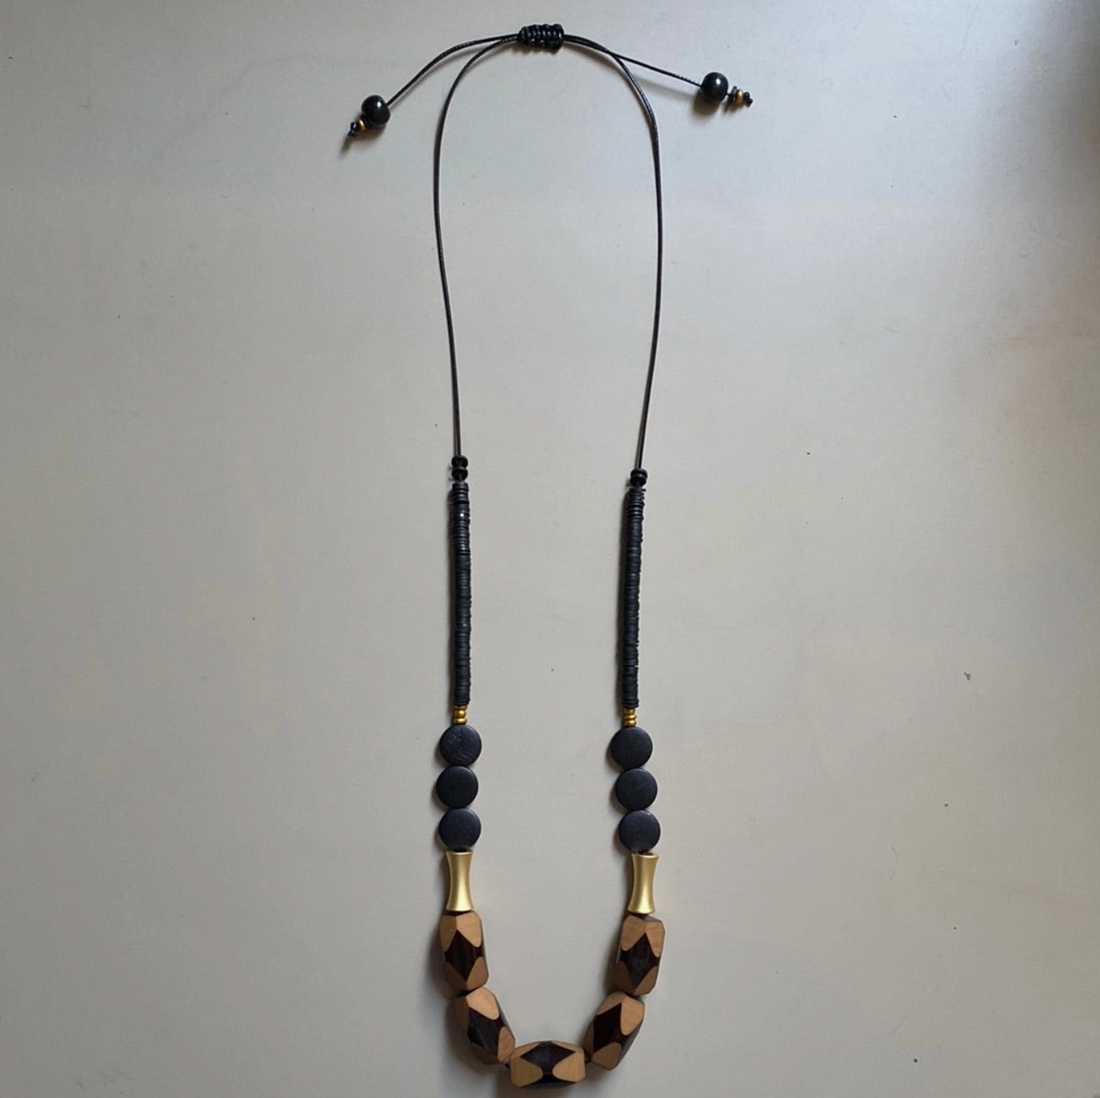 Adjustable Wood and Acrylic Necklace in Black and Tan - MRL02